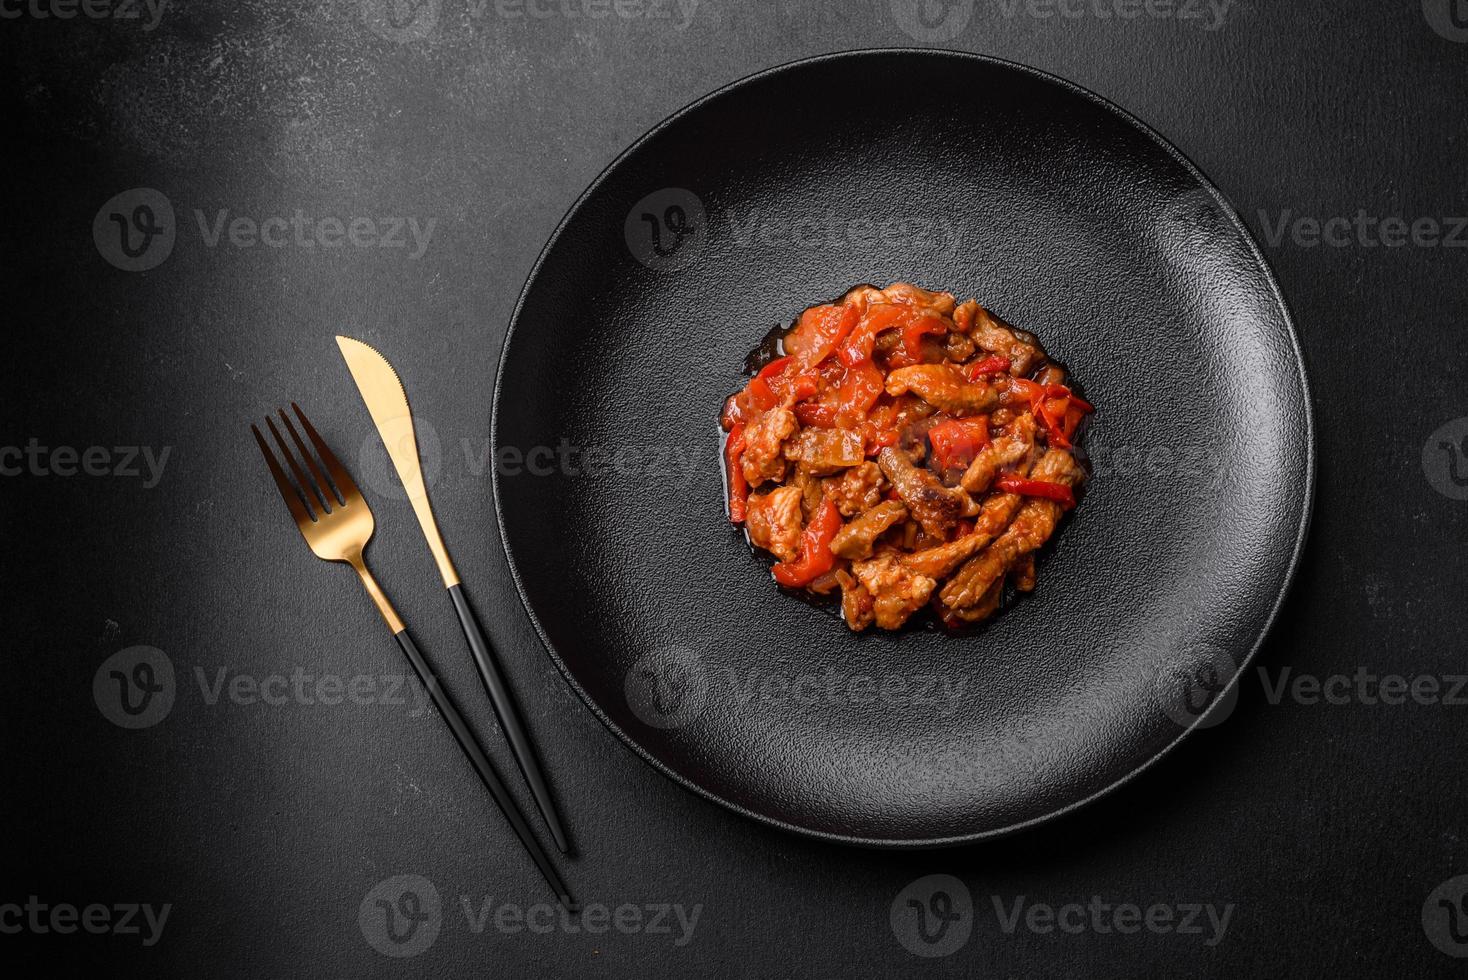 Delicious juicy meat with hot peppers and sauce on a black ceramic plate photo